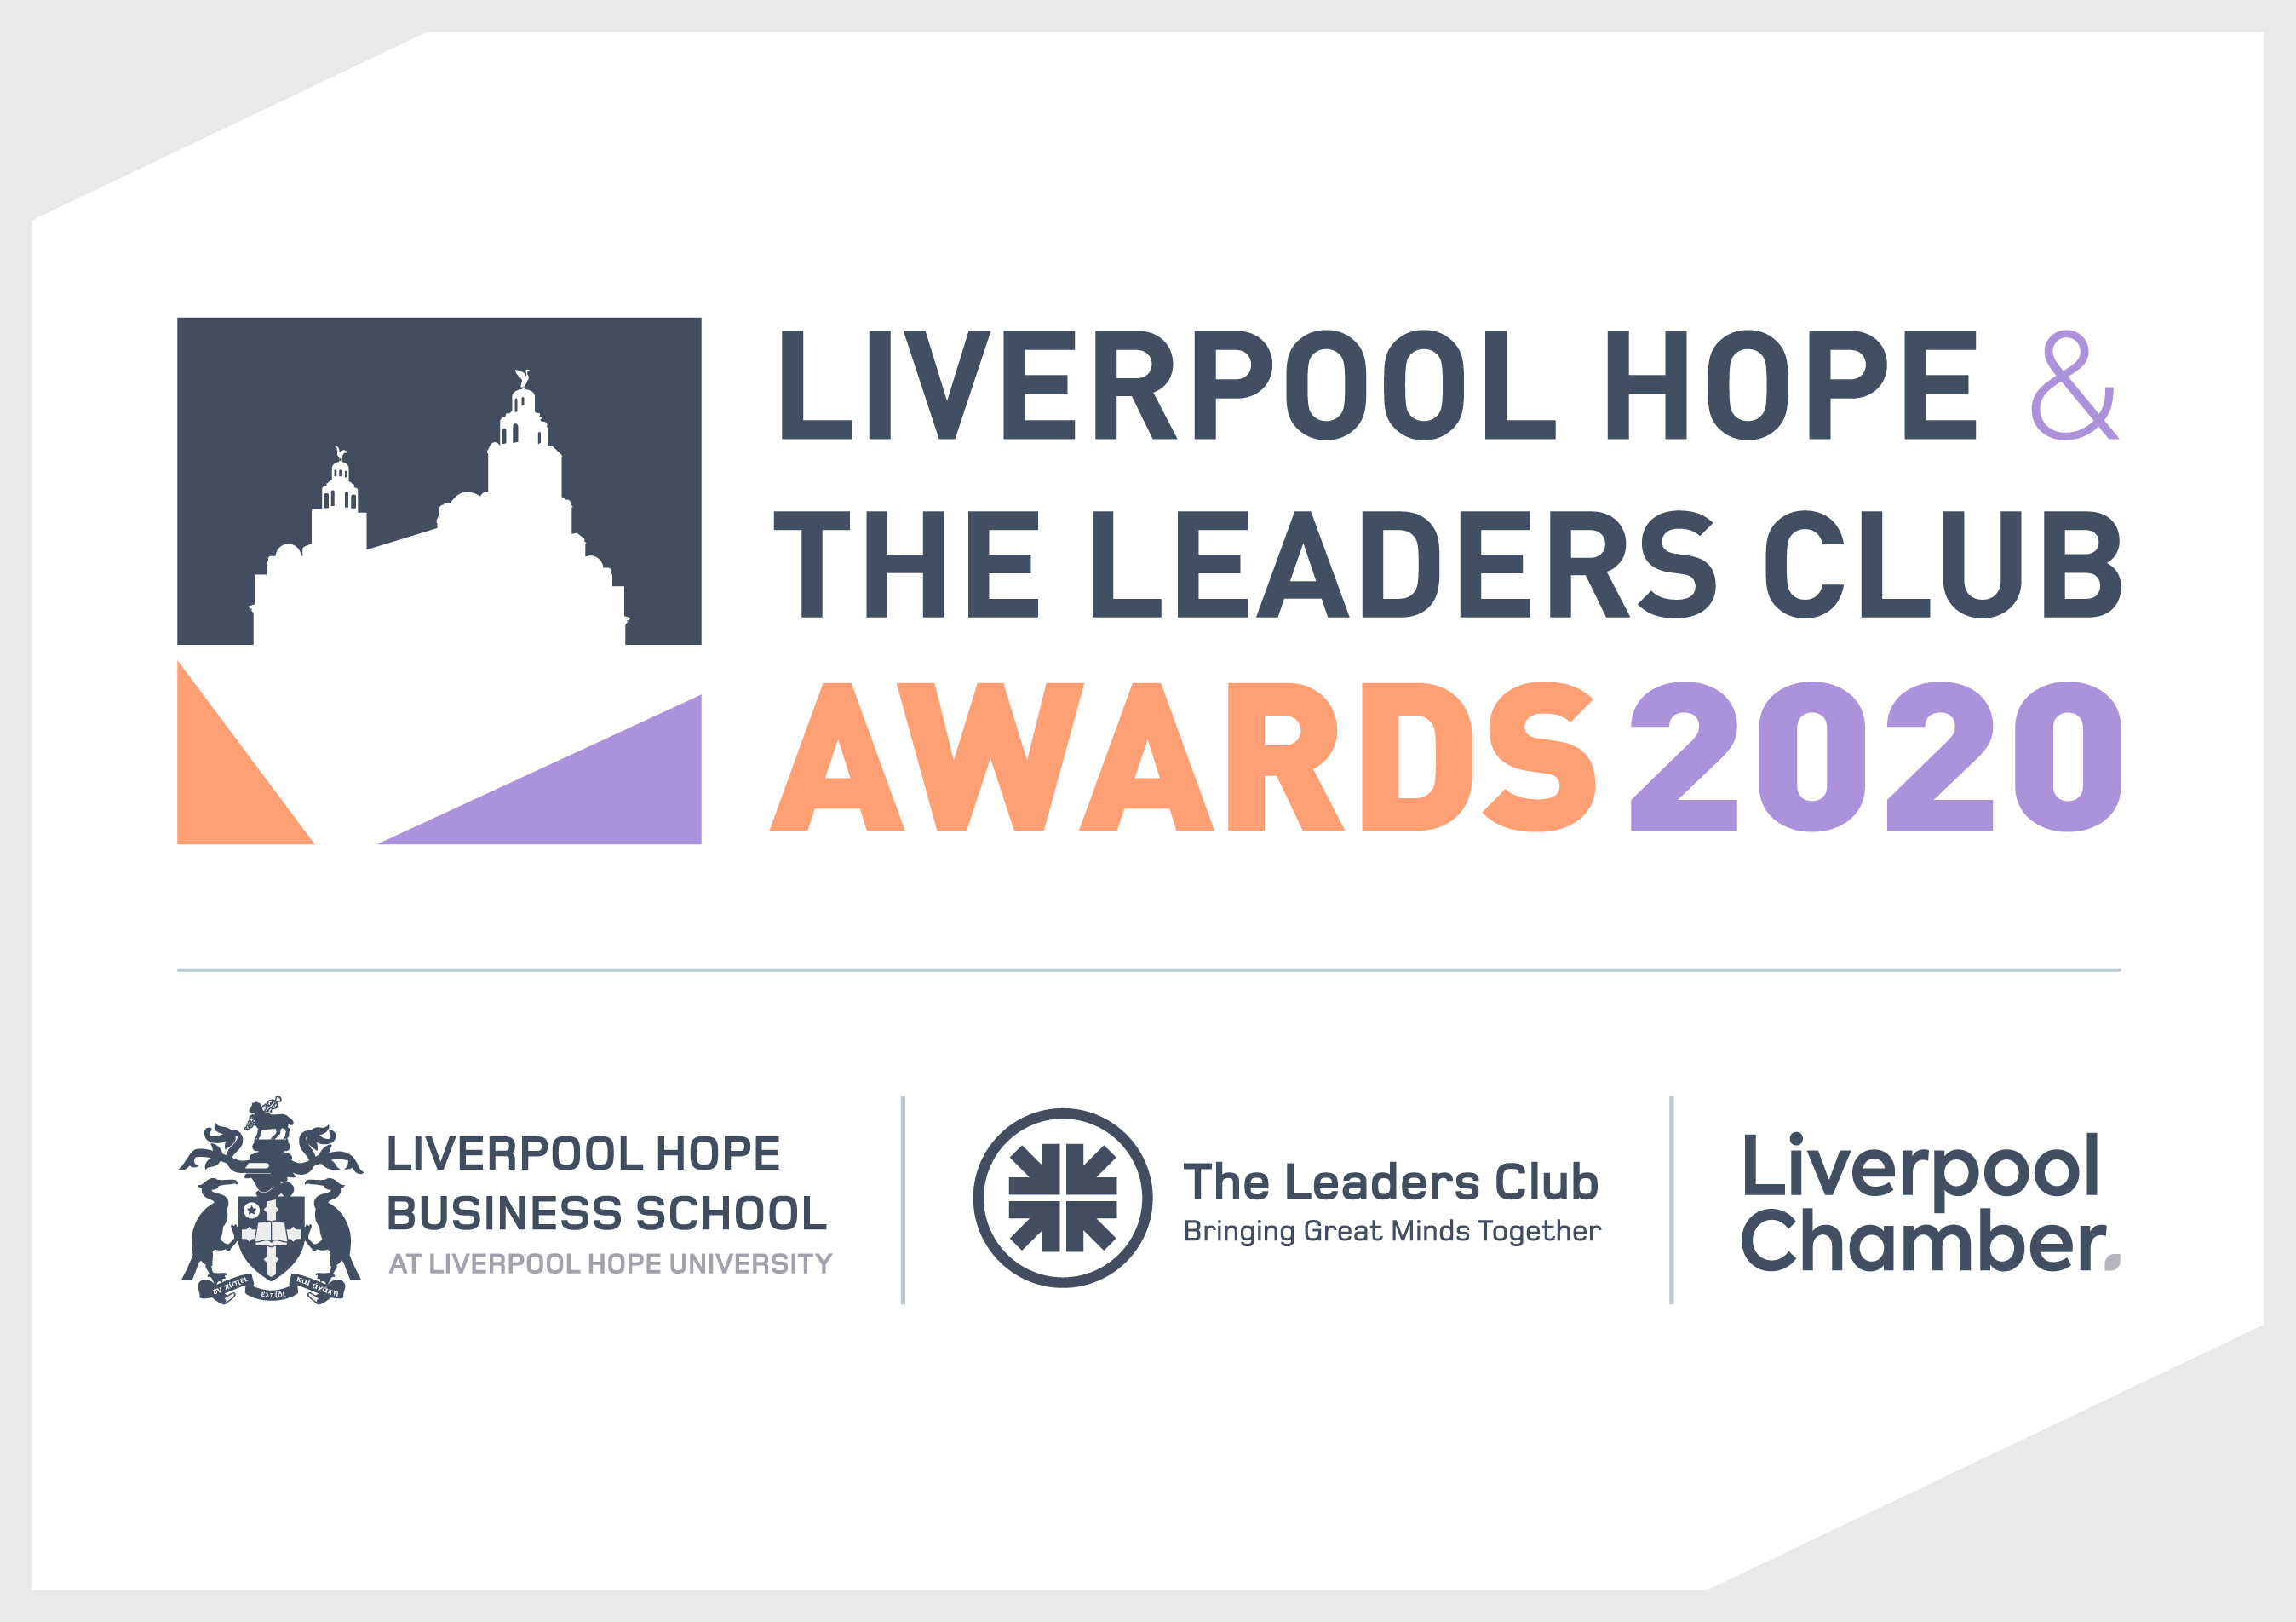 Nominations now open for Liverpool Hope and The Leaders Club Awards 2020